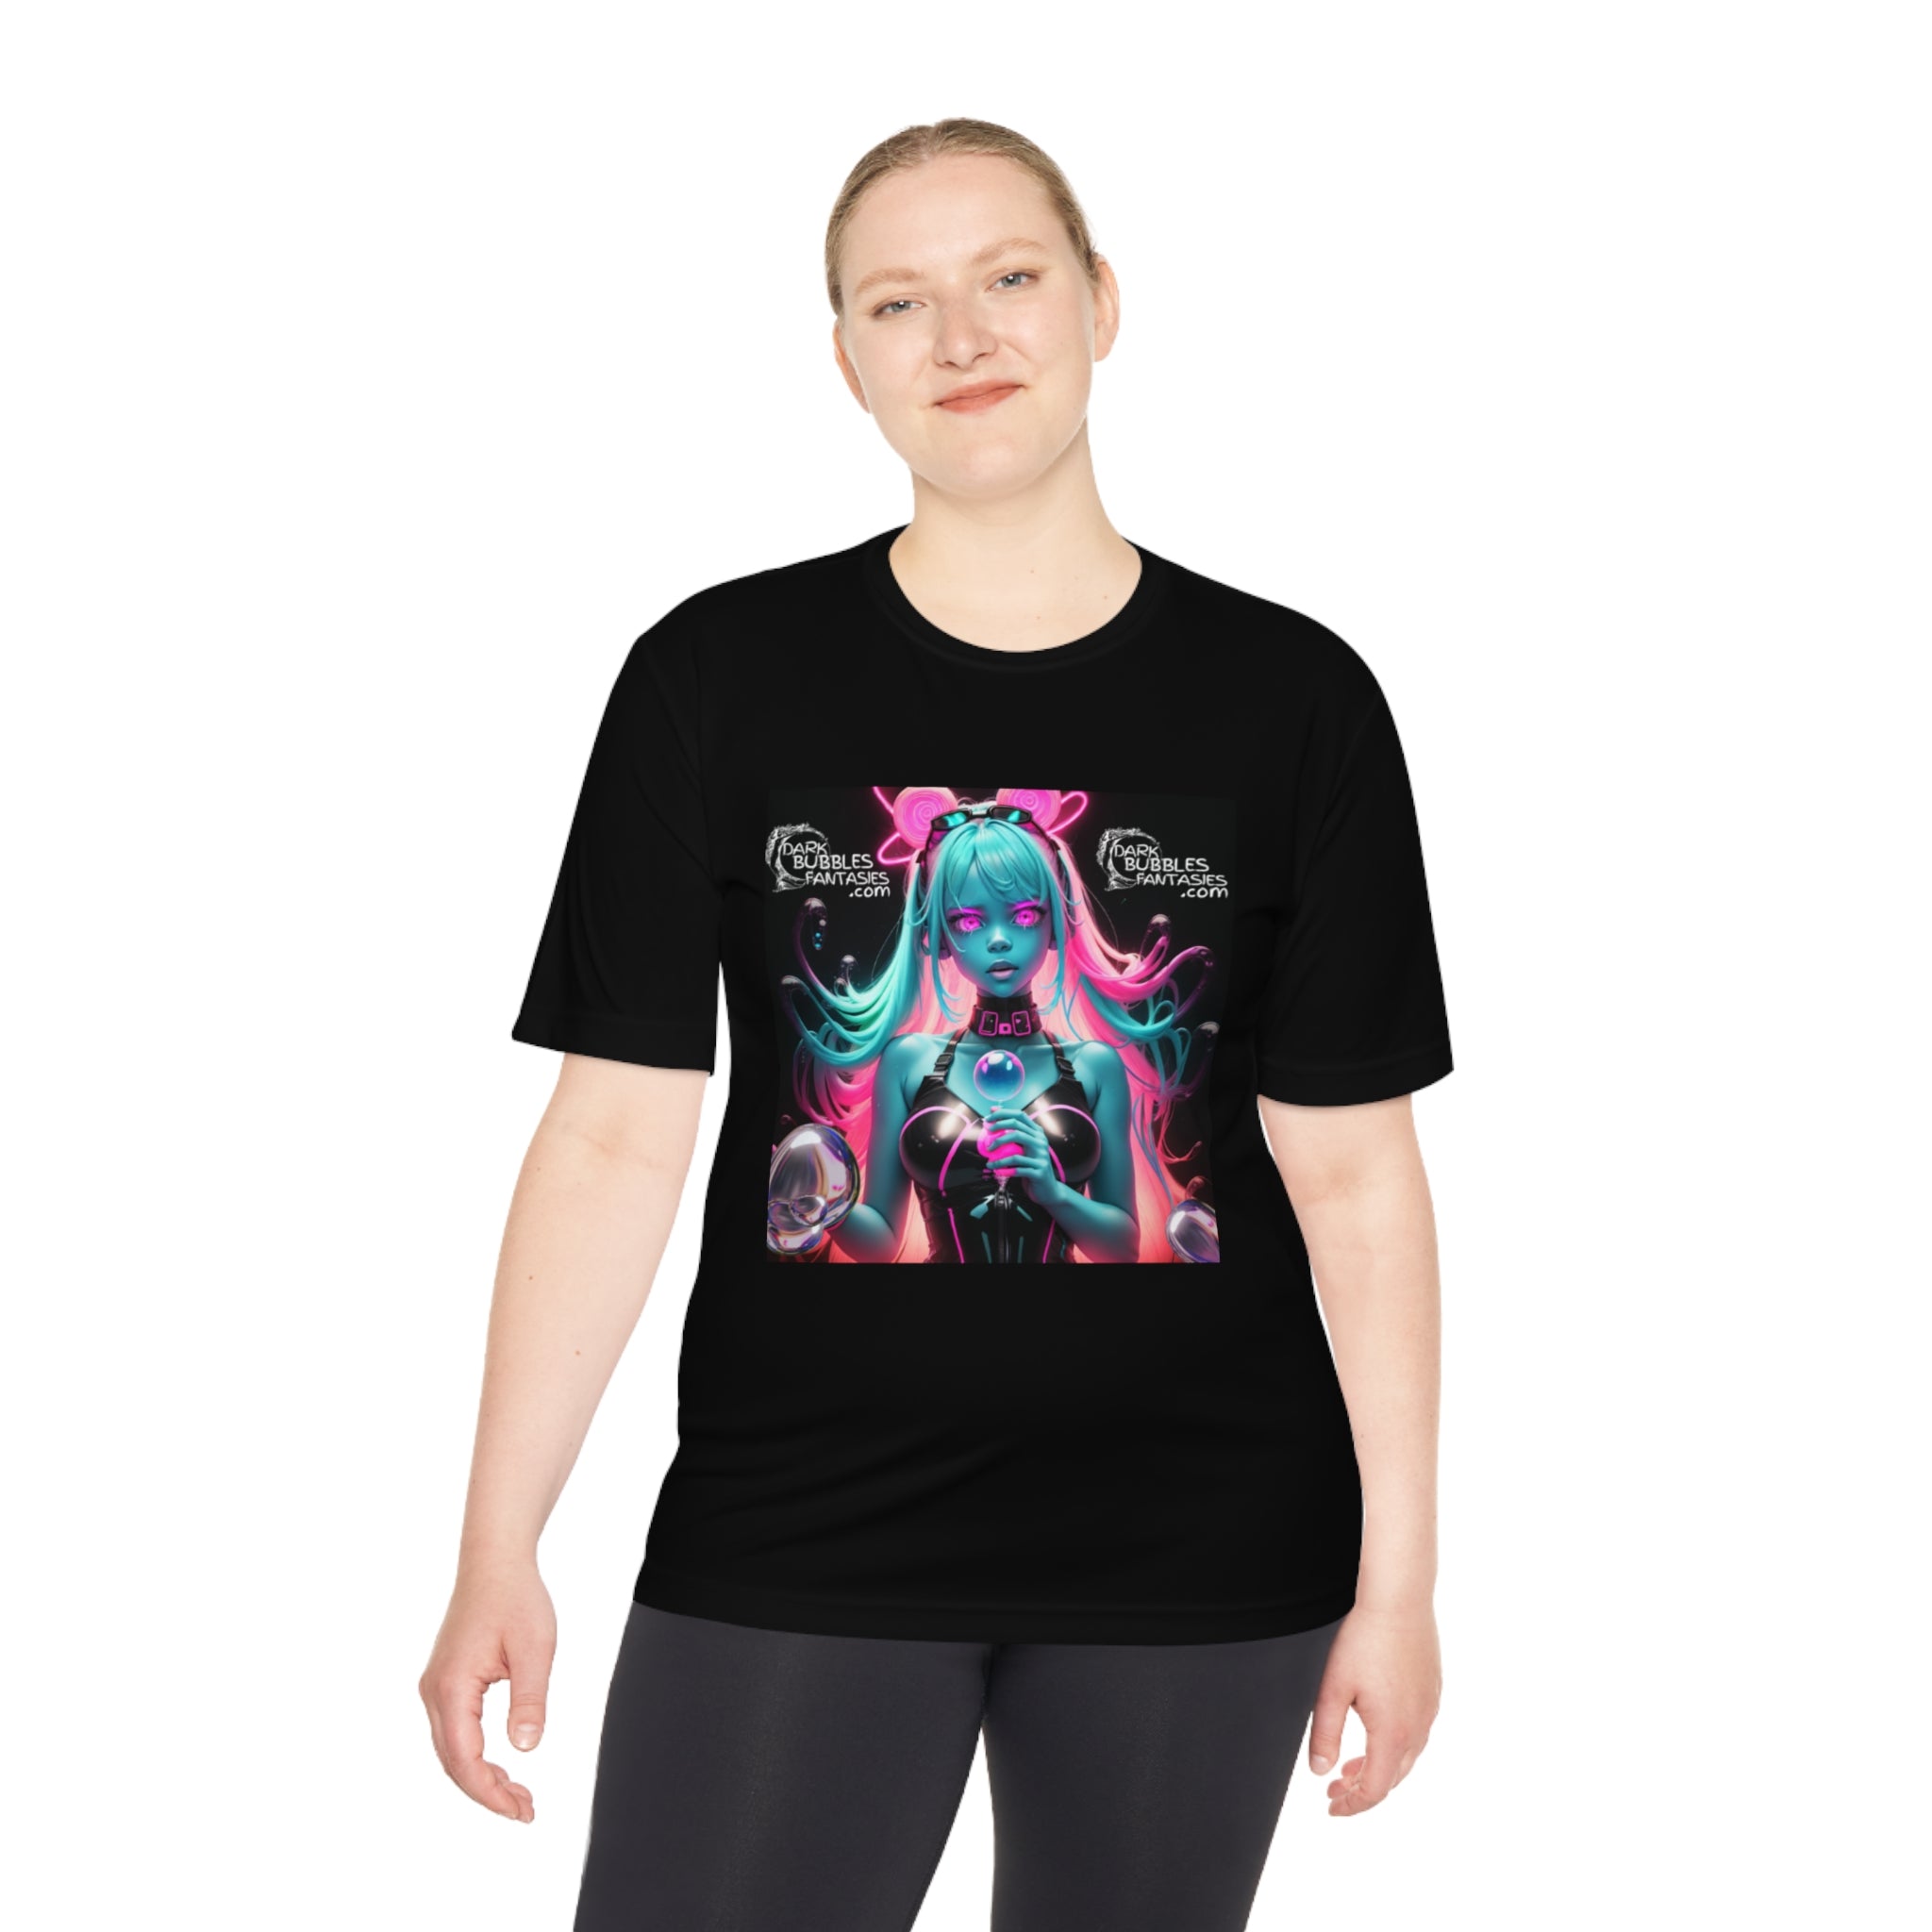 Dark bubbles Fantasies "Create with us" T-Shirt